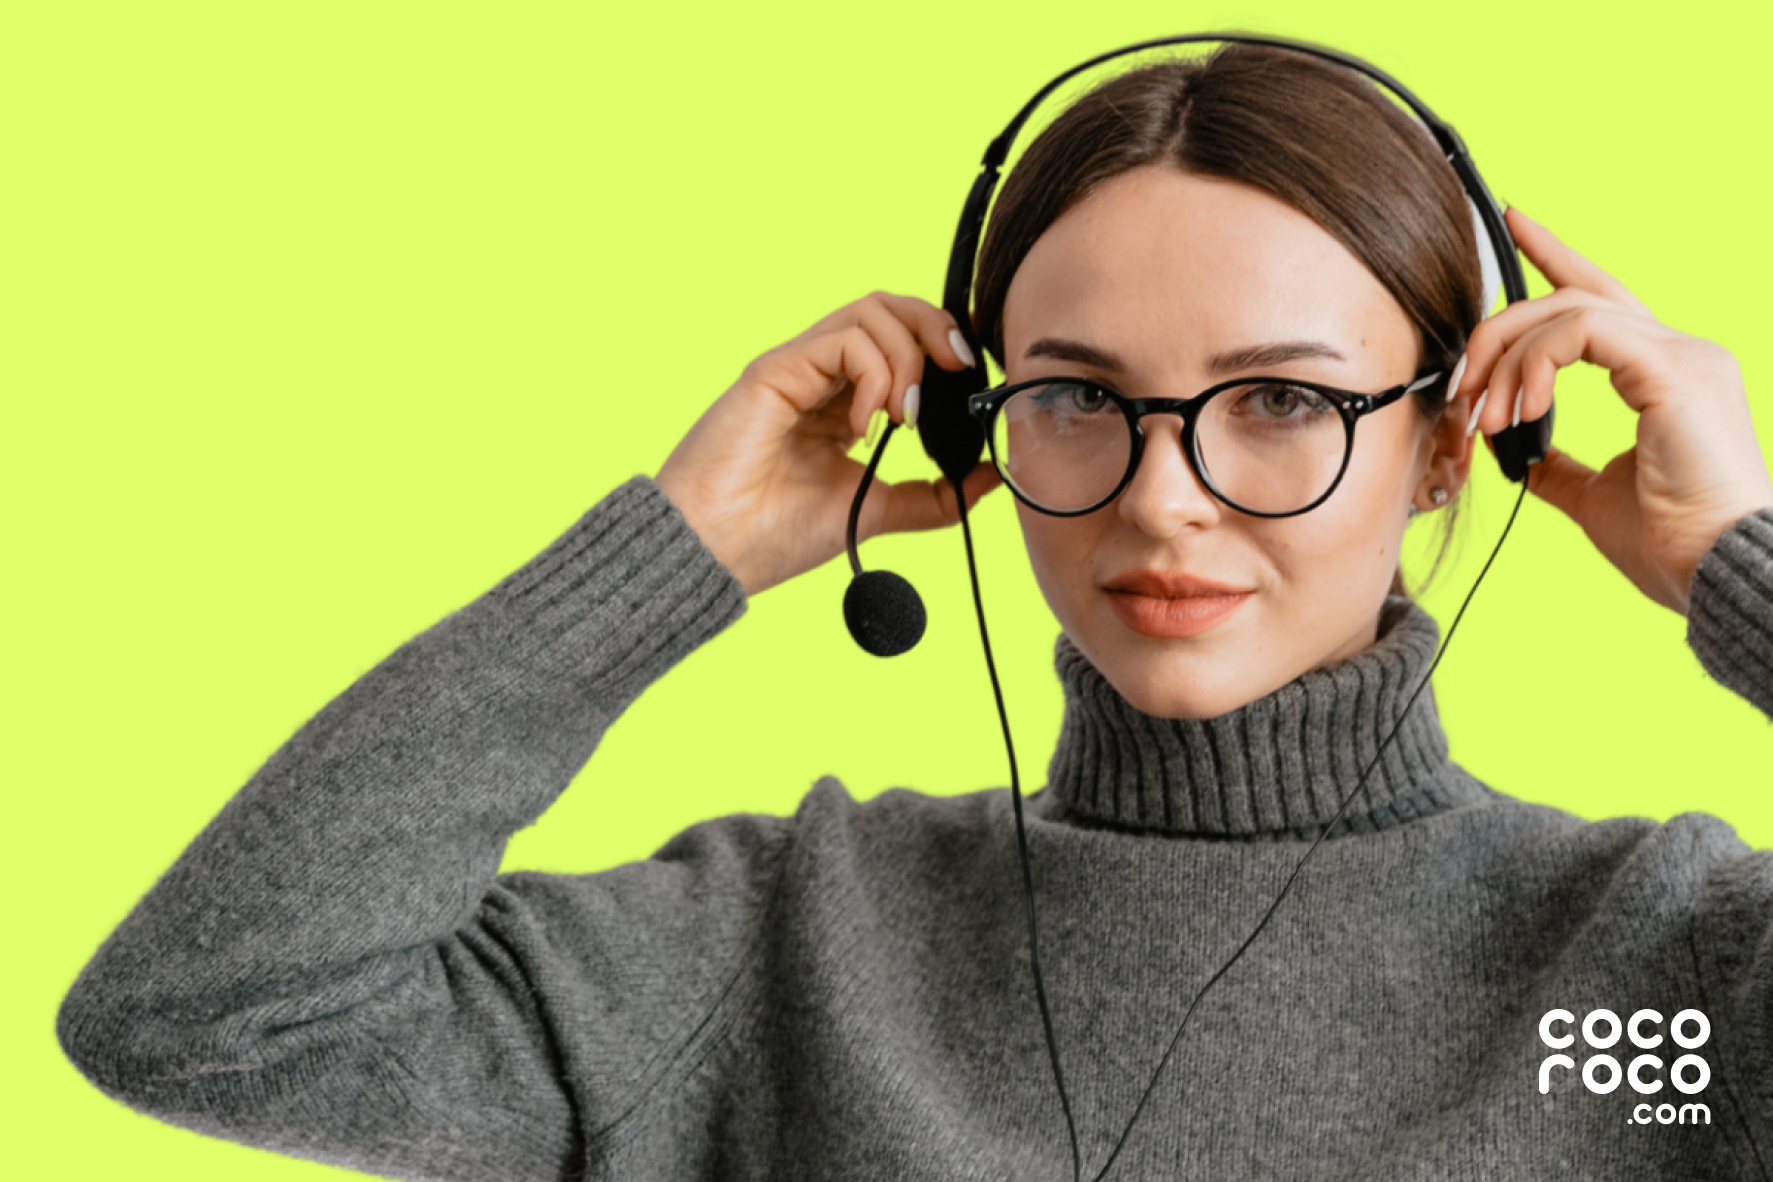 Woman in glasses and a turtleneck putting on a headset